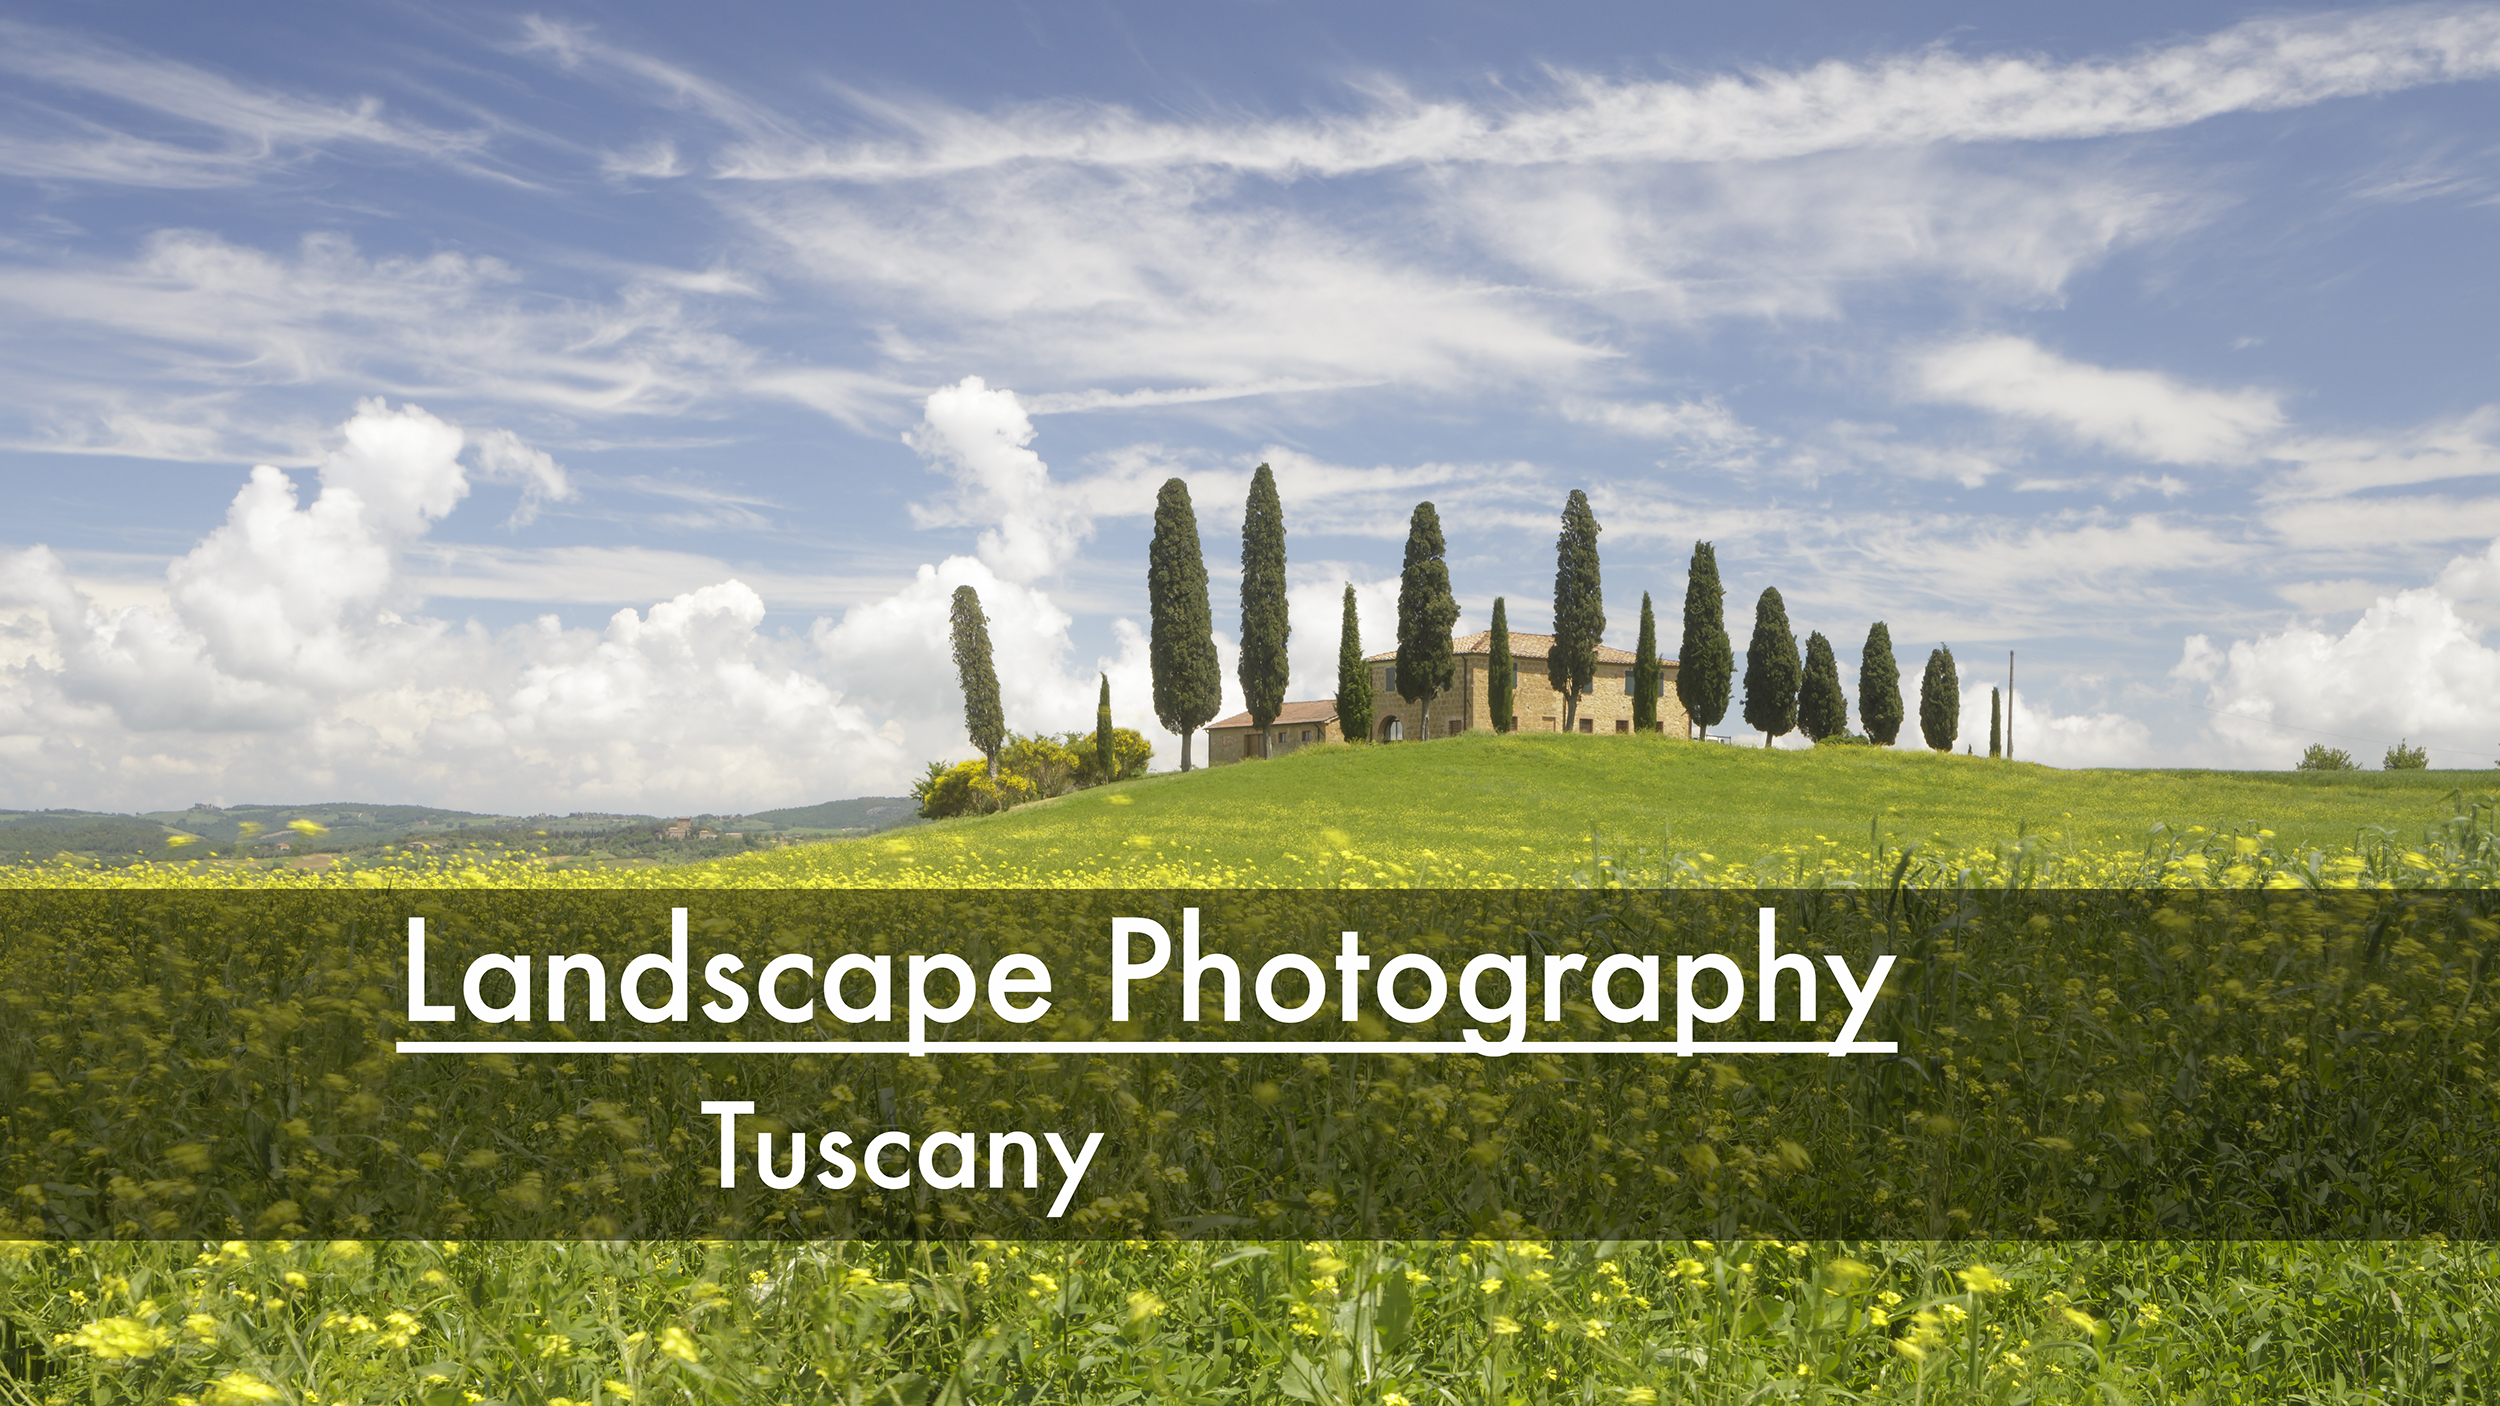 Landscape photography in Tuscany. May 2018. Photography tour and workshop.